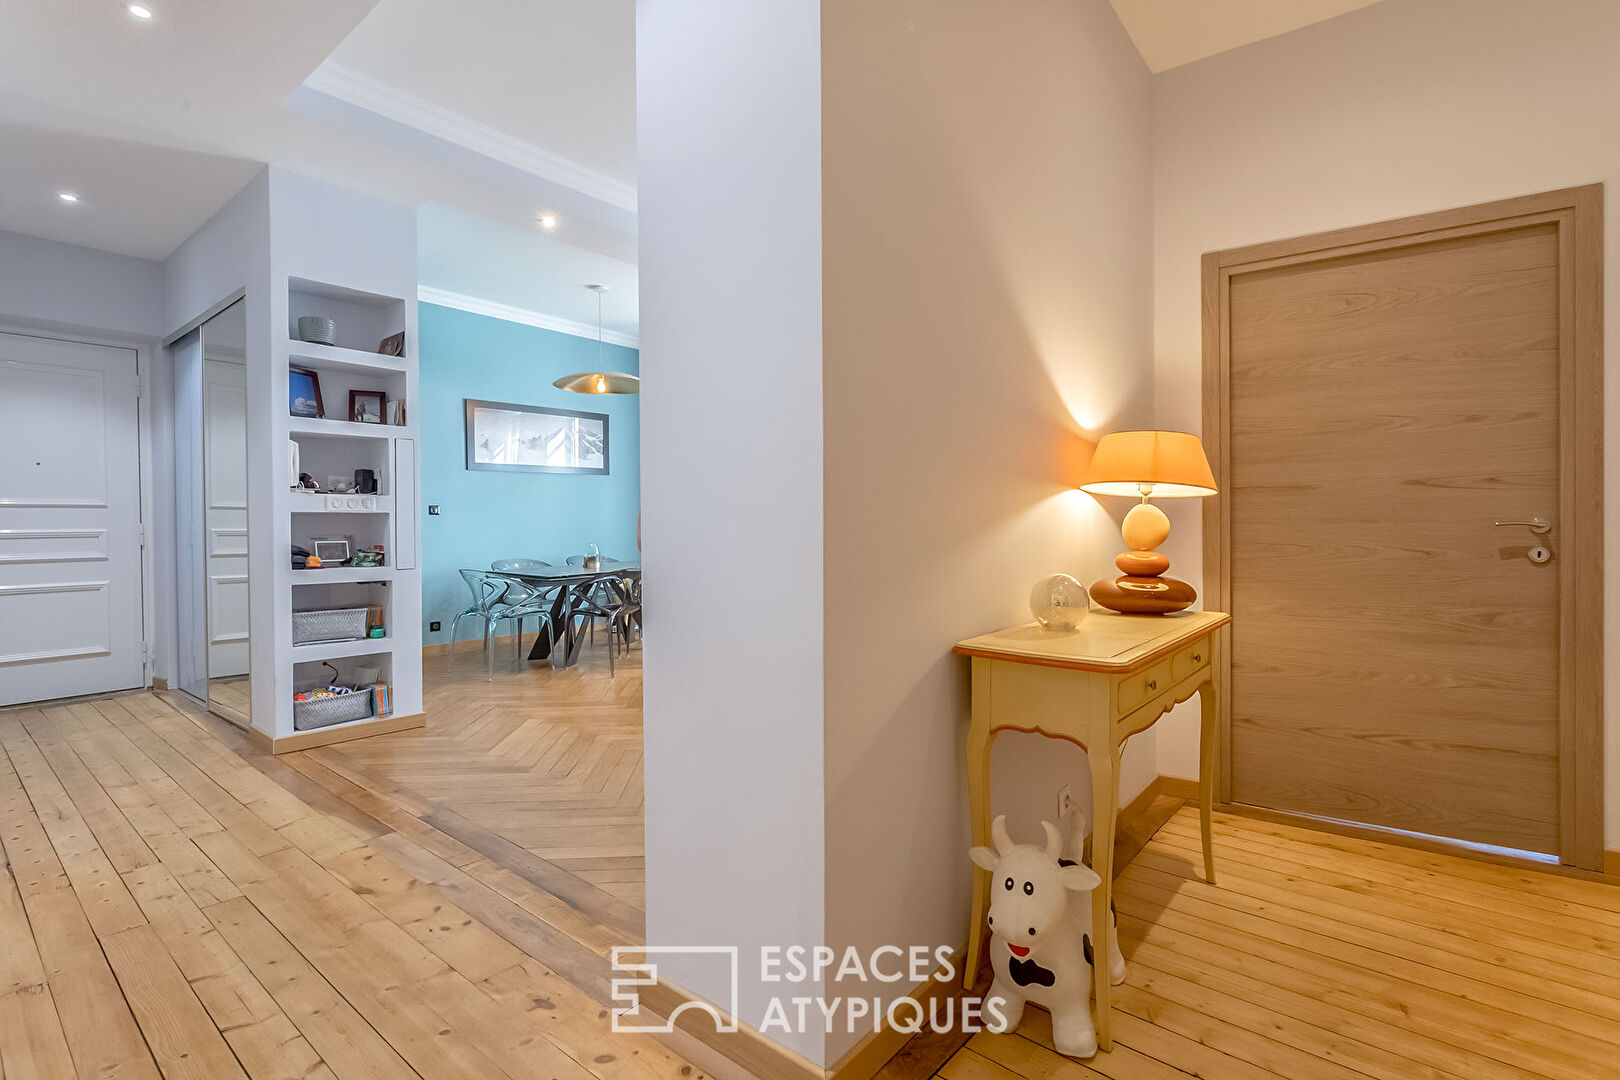 Apartment in the old center of Chambéry